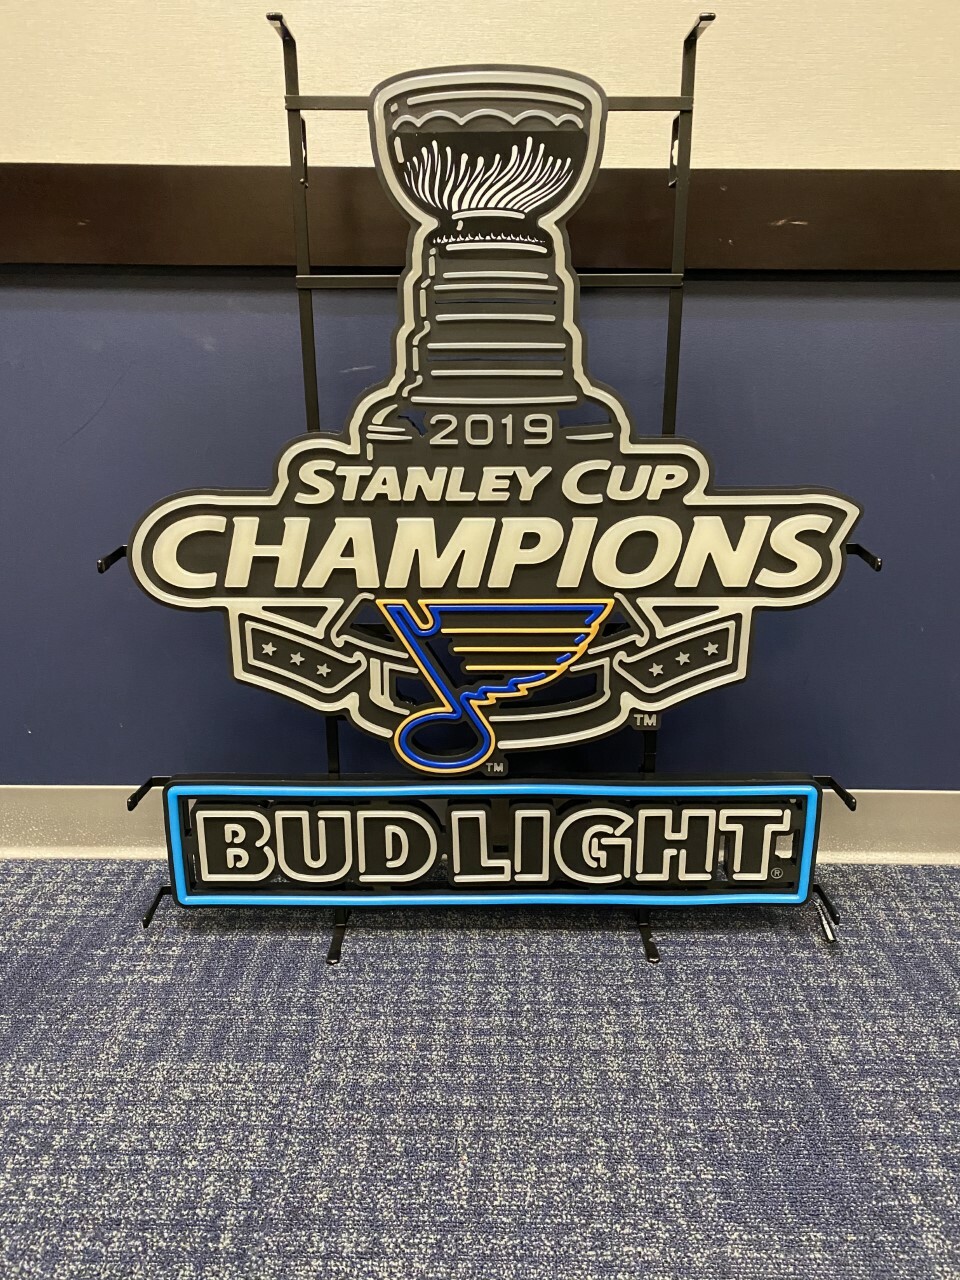 St. Louis Blues 2019 Stanley Cup Champions Neo Mouse Pad - BiggSports